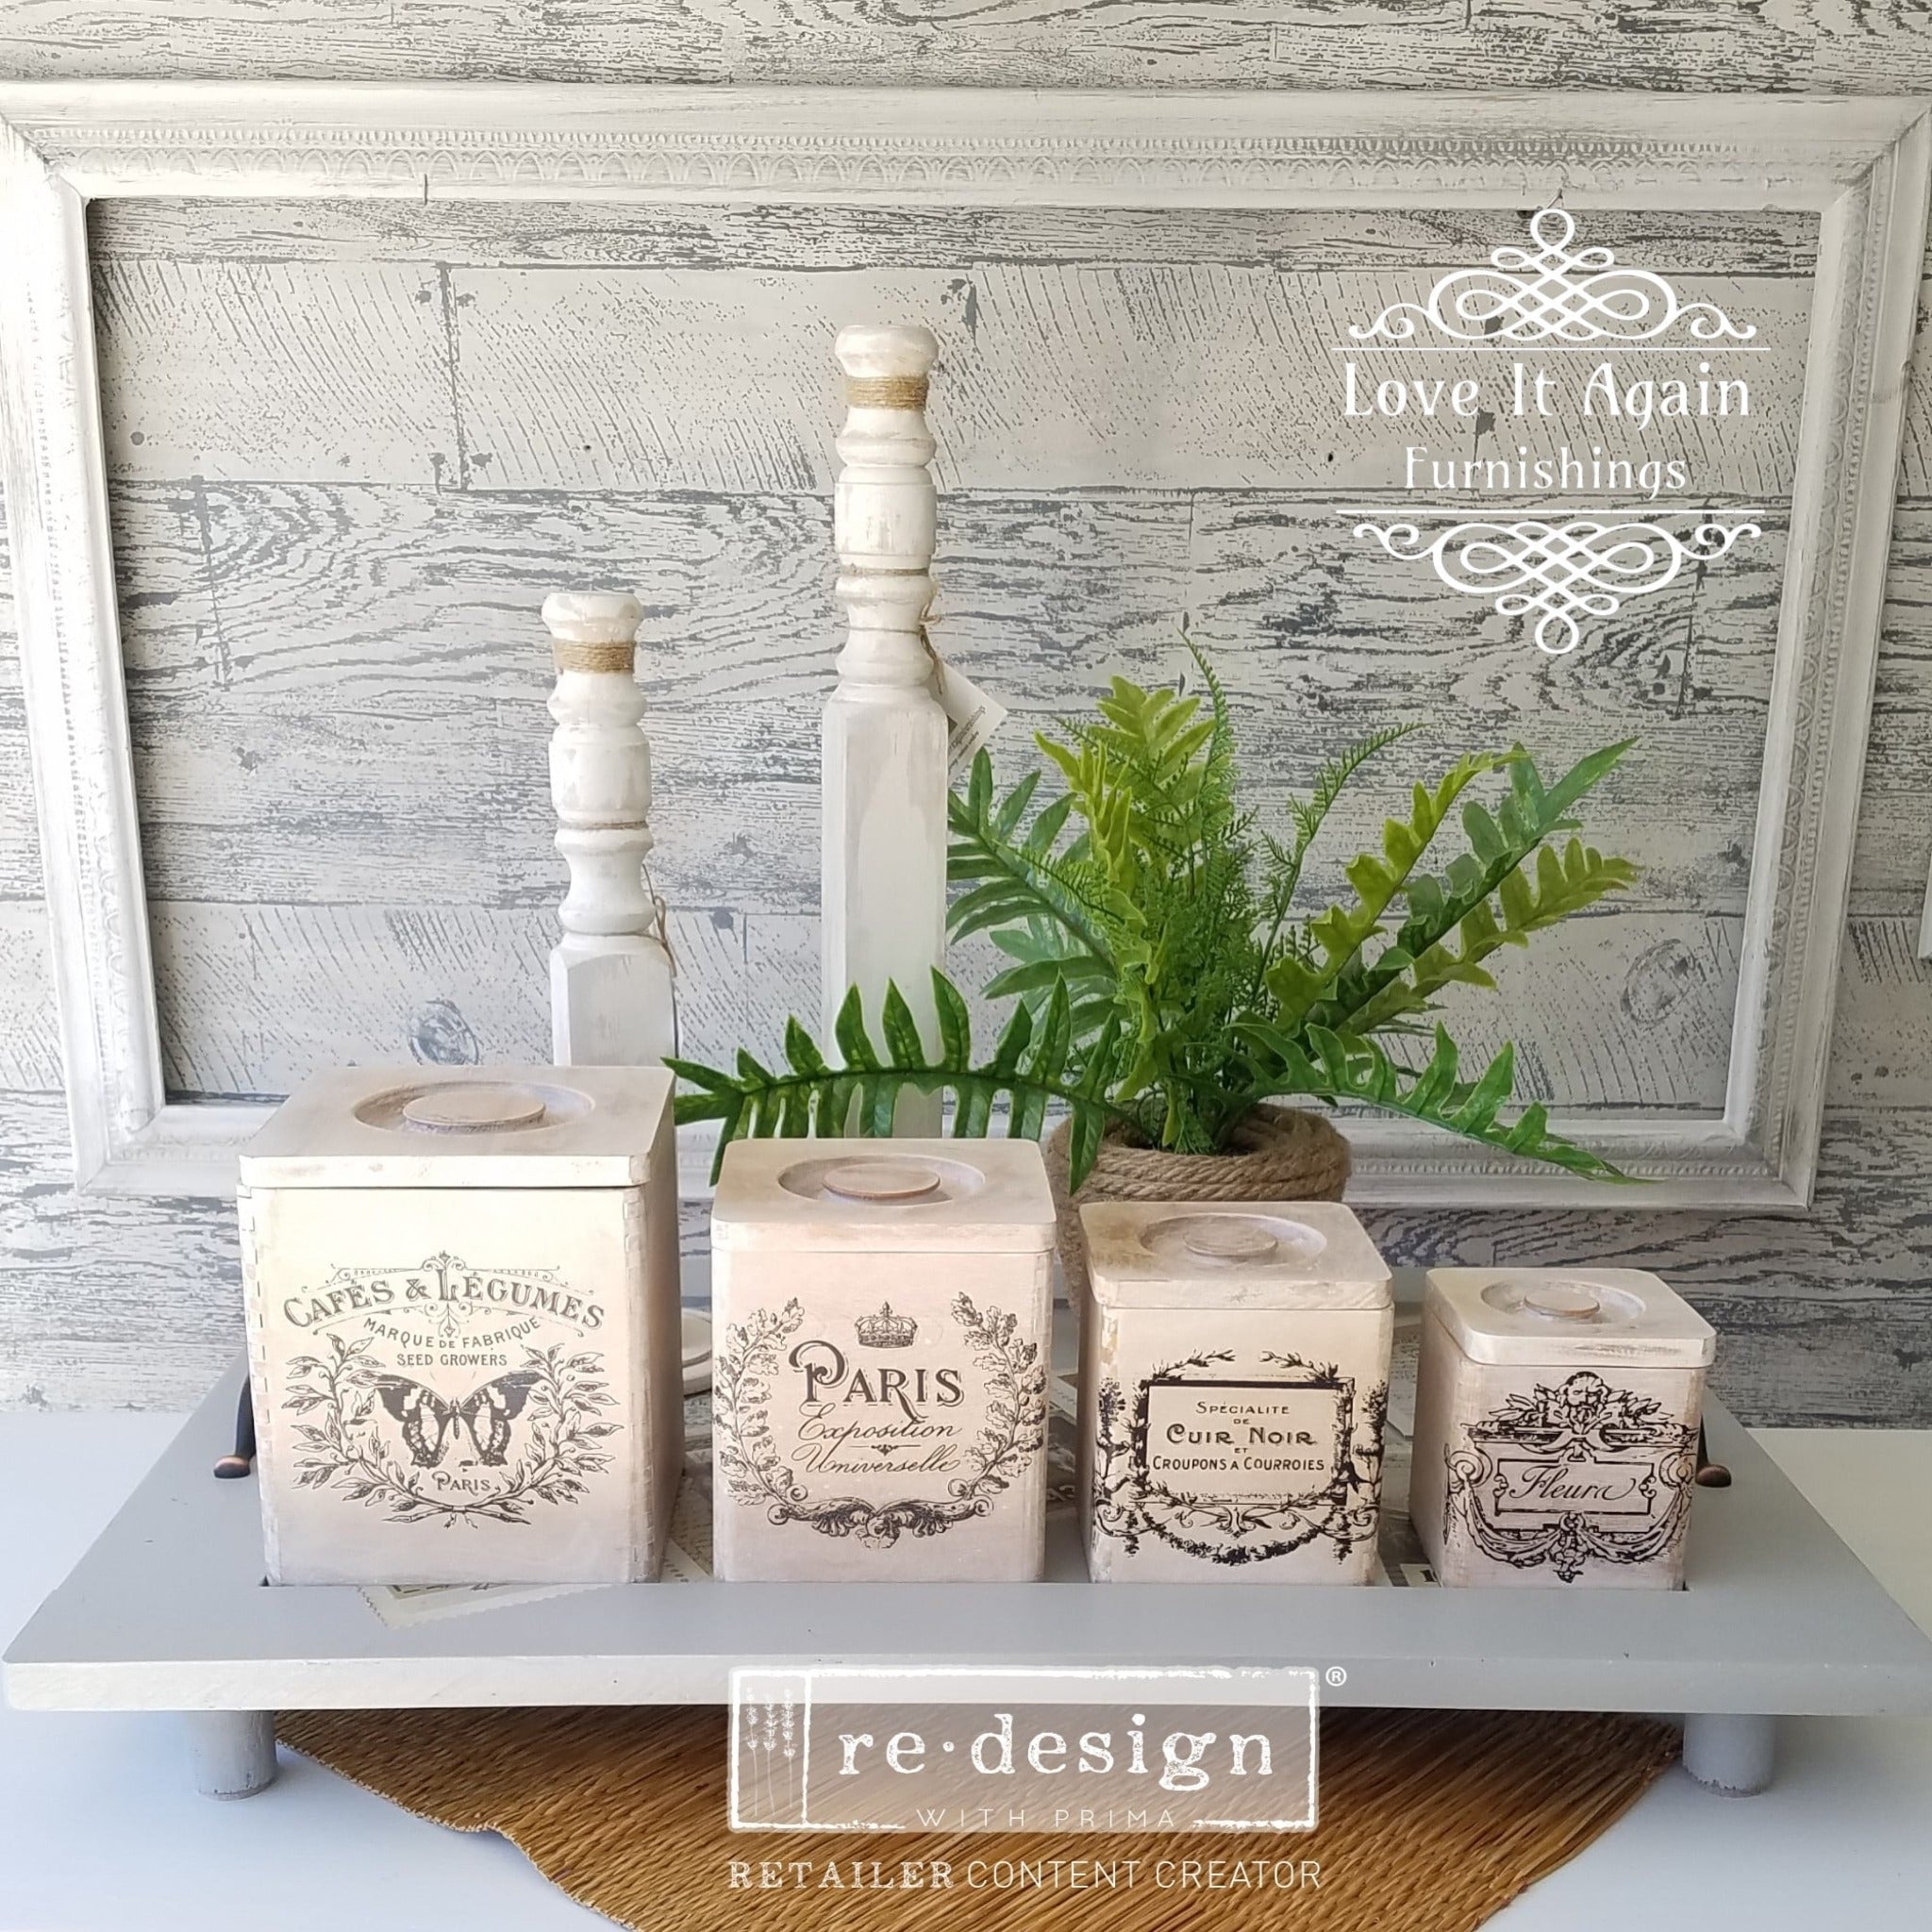 Four counter top dry storage sqaure containers refurbished by Love it Again Furnishings are painted light beige and feature ReDesign with Prima's Classic Vintage Labels transfer on them.